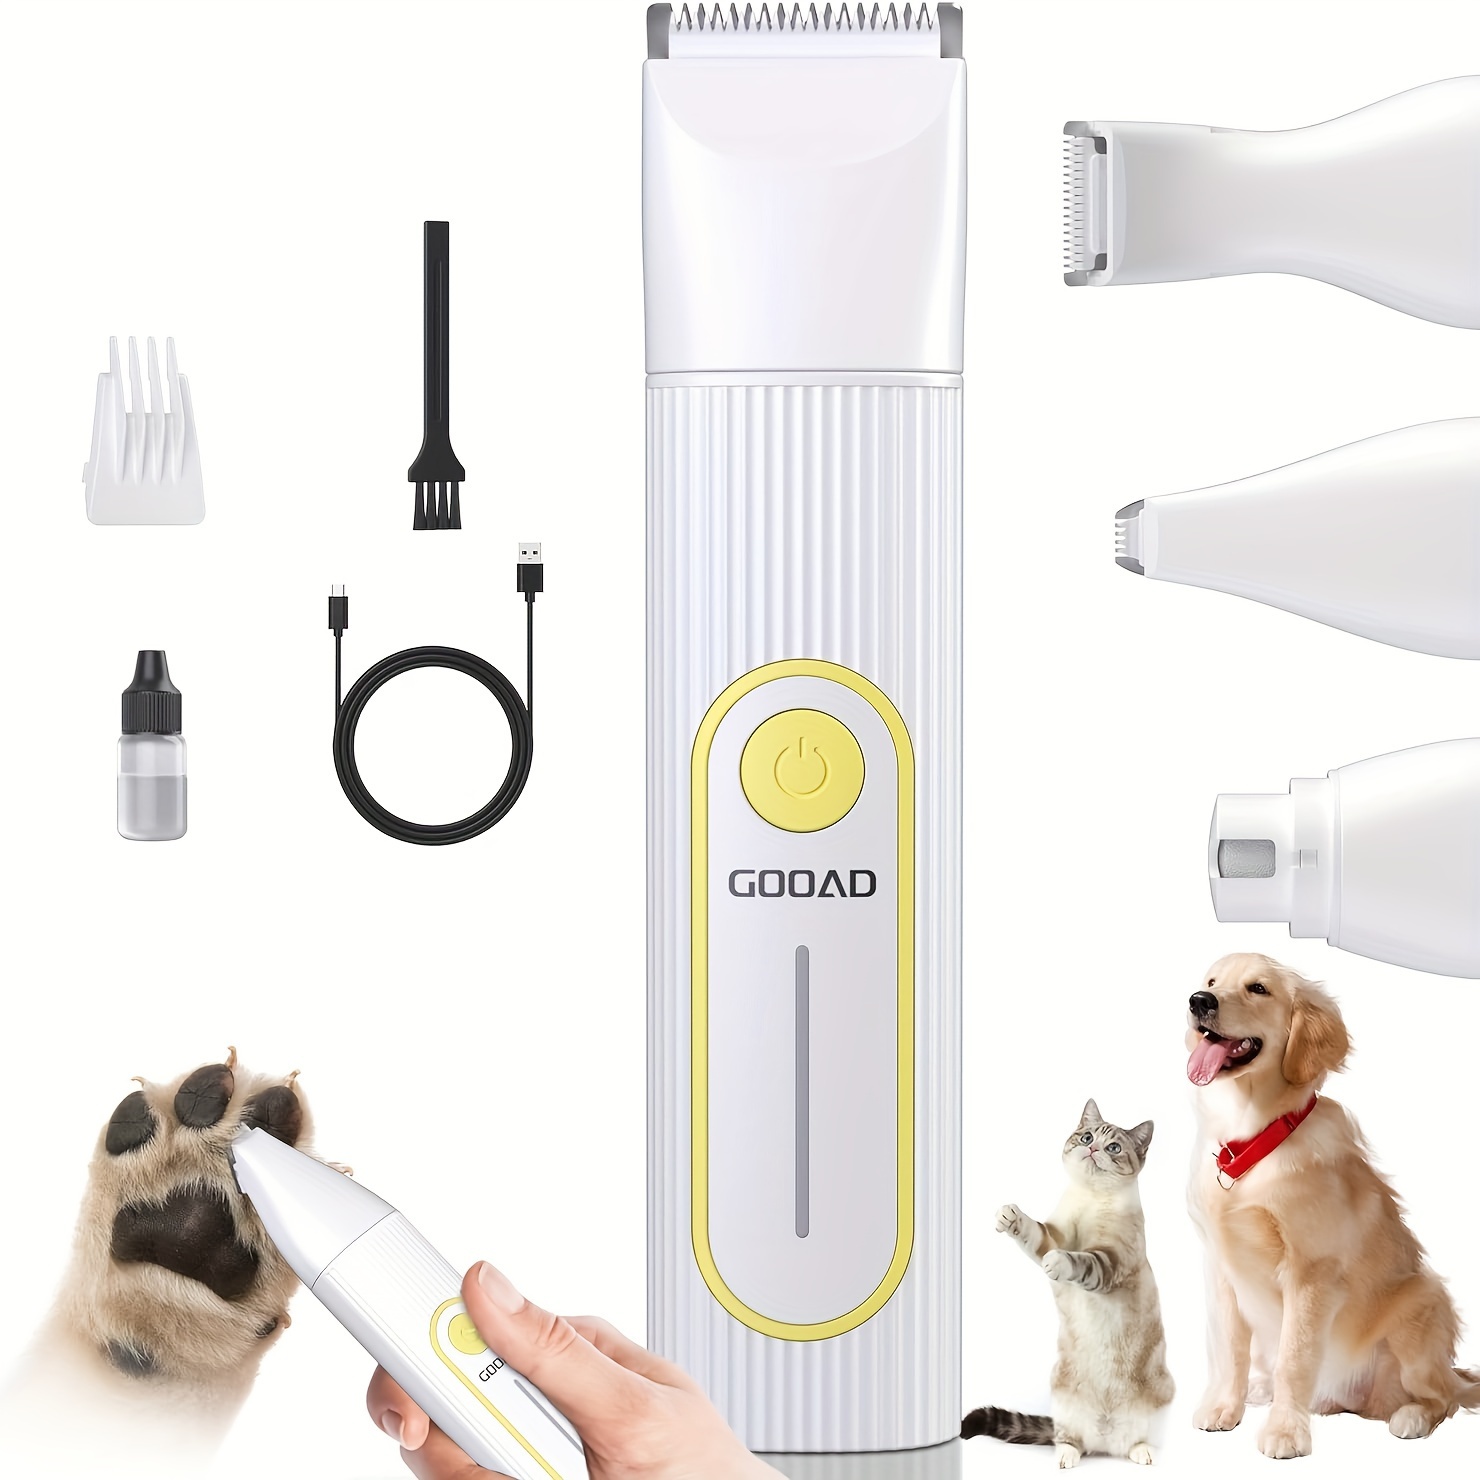 

Gooad Dog Clippers Grooming Kit - Low Noise - Cordless Quiet Paw Trimmer Nail Grinder Pet Hair Shaver For Small And Large Dogs Cats Dog Hair Trimmer Also For Pet Hair Around Paws Eyes Ears Face Rump